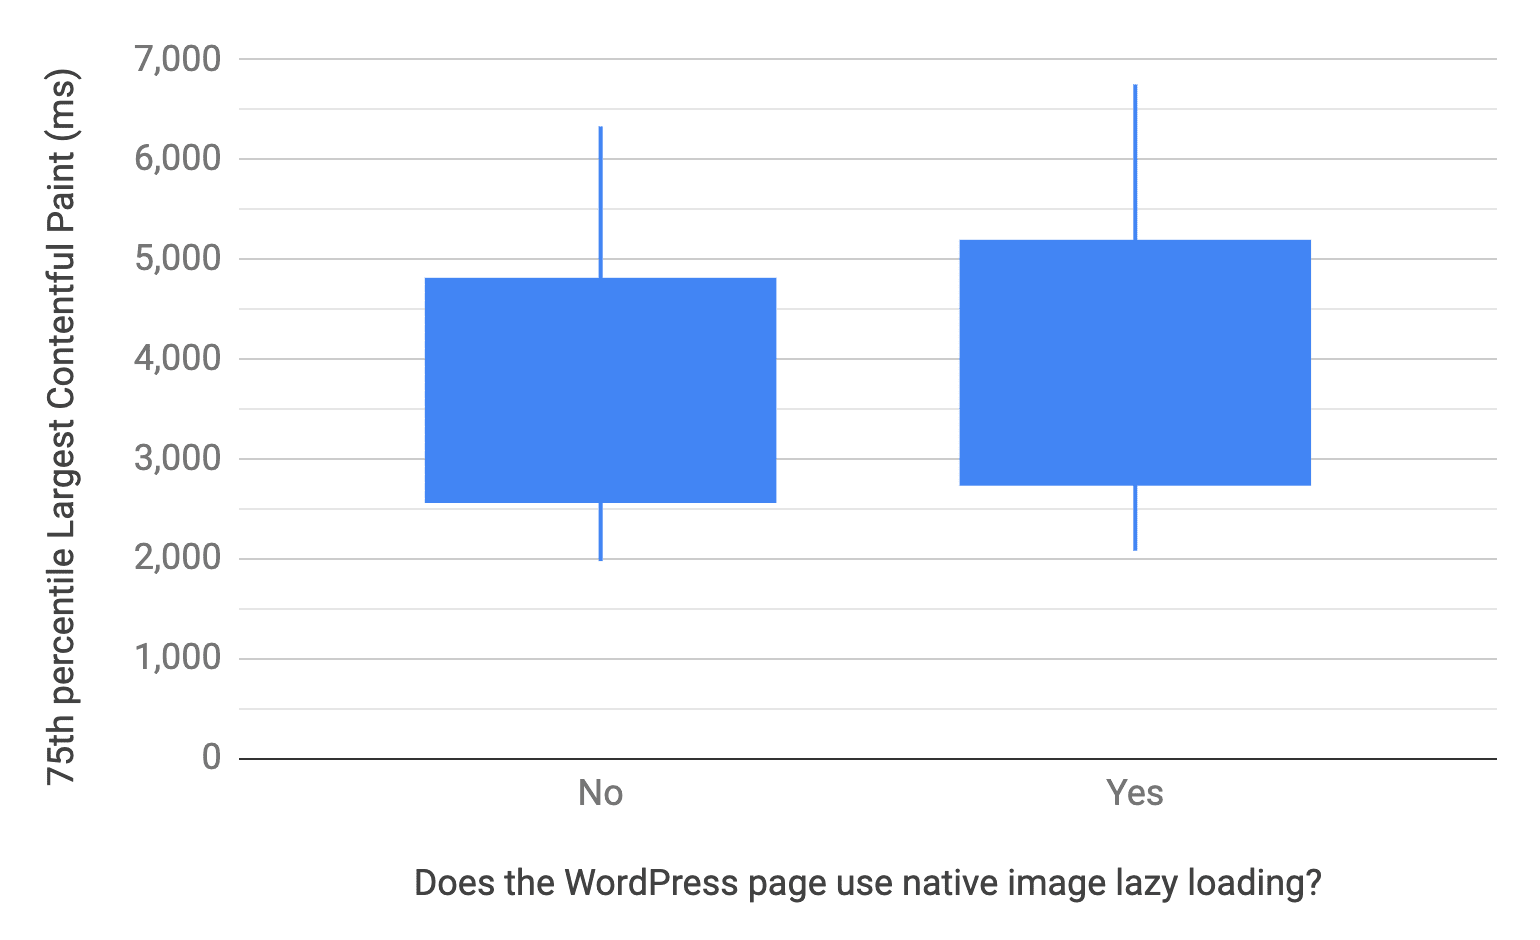 Box and whisker chart showing the 10, 25, 75, and 90th percentiles for WordPress pages that do and do not use native image lazy loading. Comparatively, the LCP distribution of pages that do not use it is faster than those that do, similar to the previous chart.